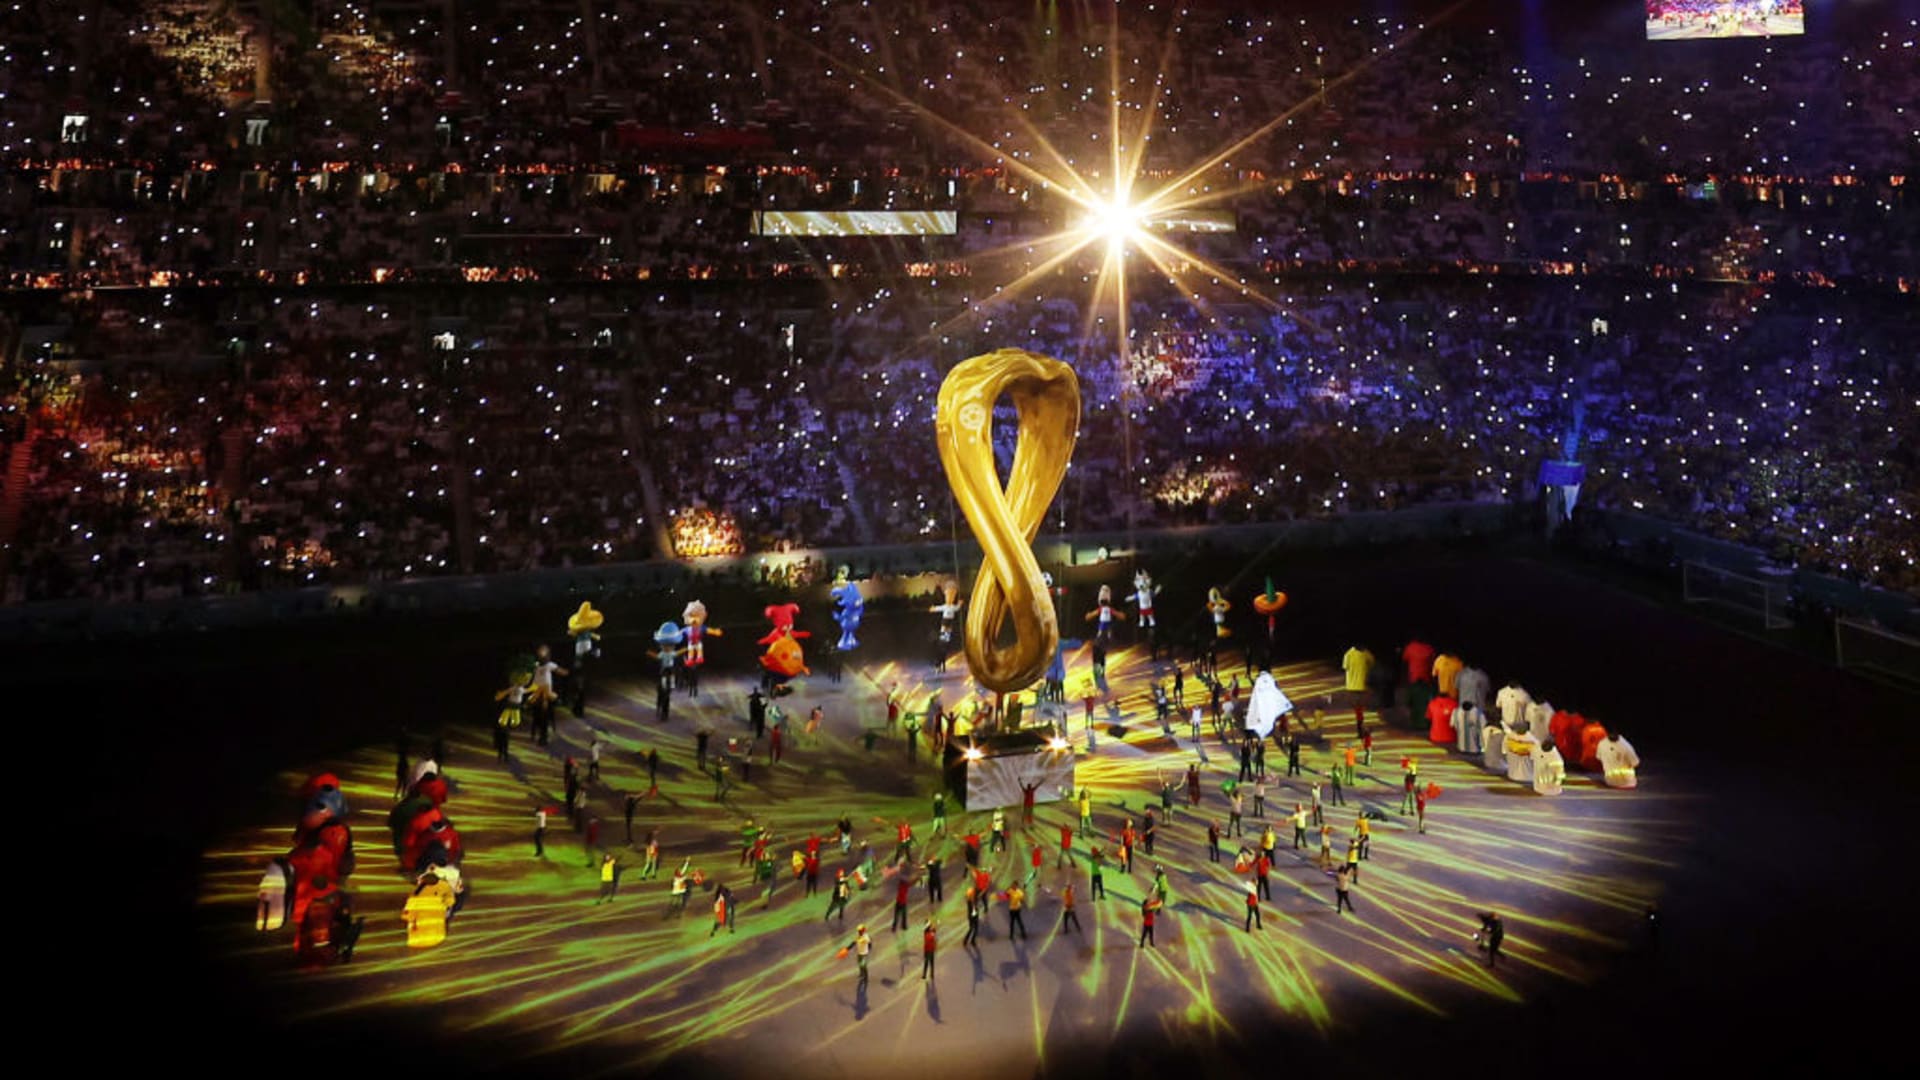 FIFA World Cup 2022 Closing Ceremony: When And Where To Watch Live  Telecast, Live Streaming?